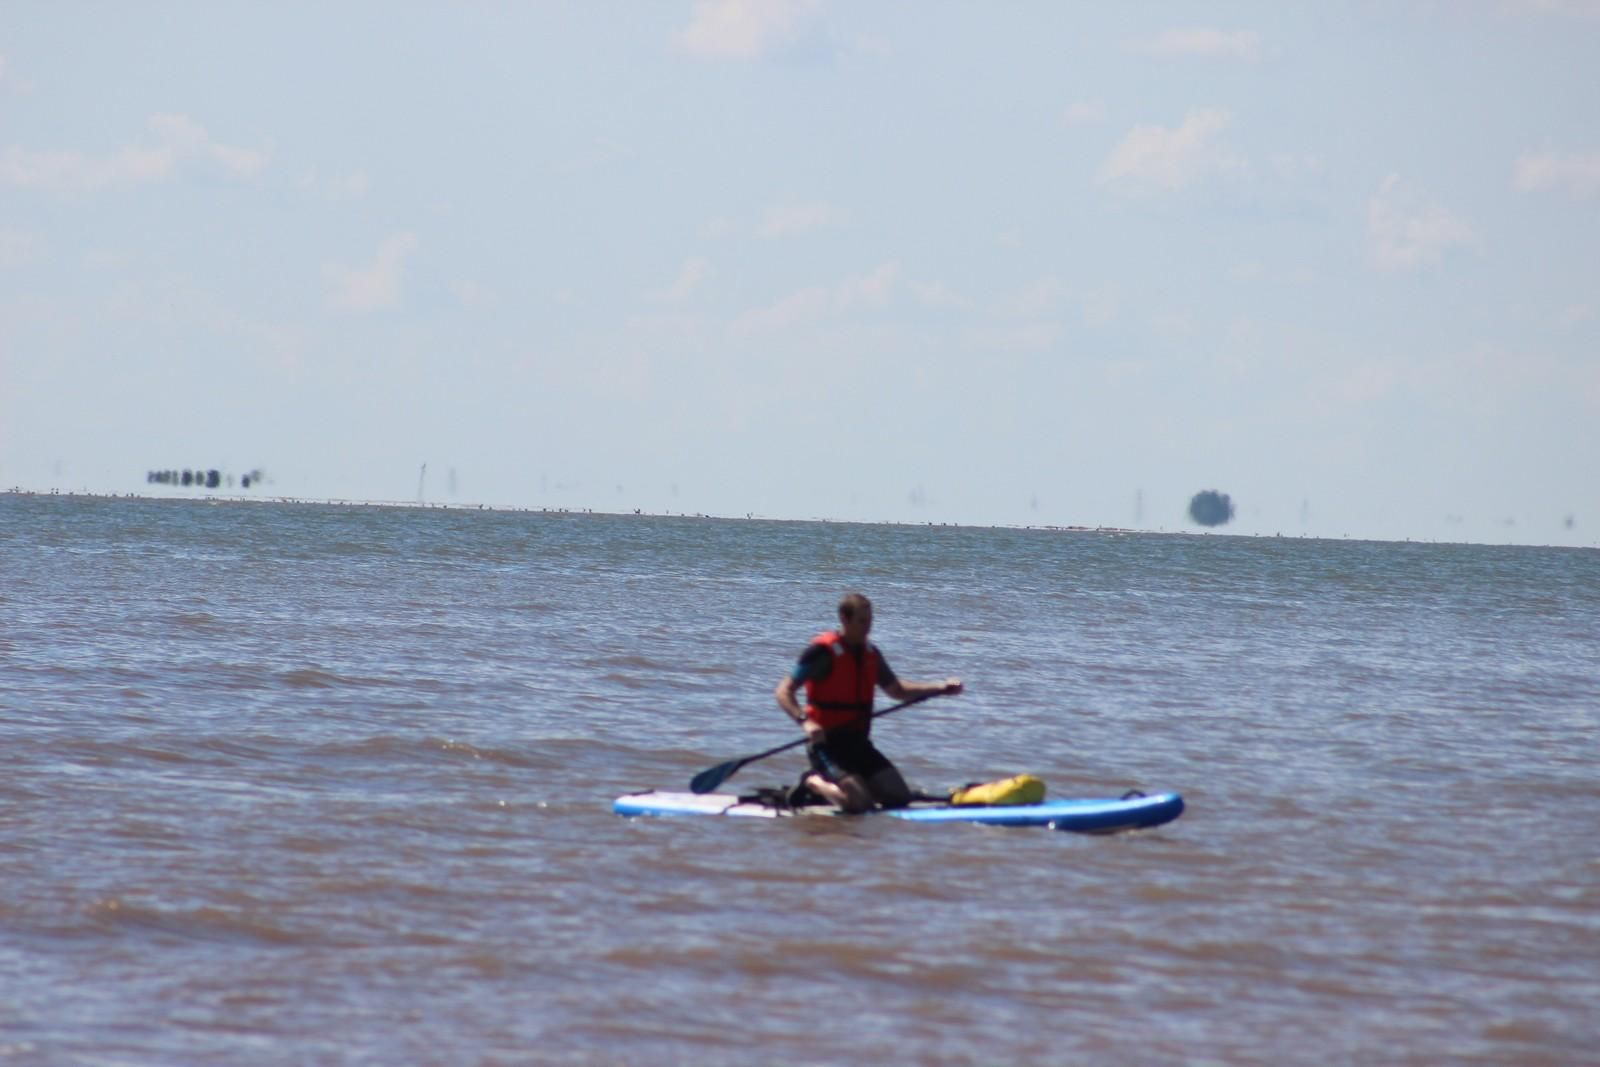 A man paddling in the sea here in Heacham on a paddleboard